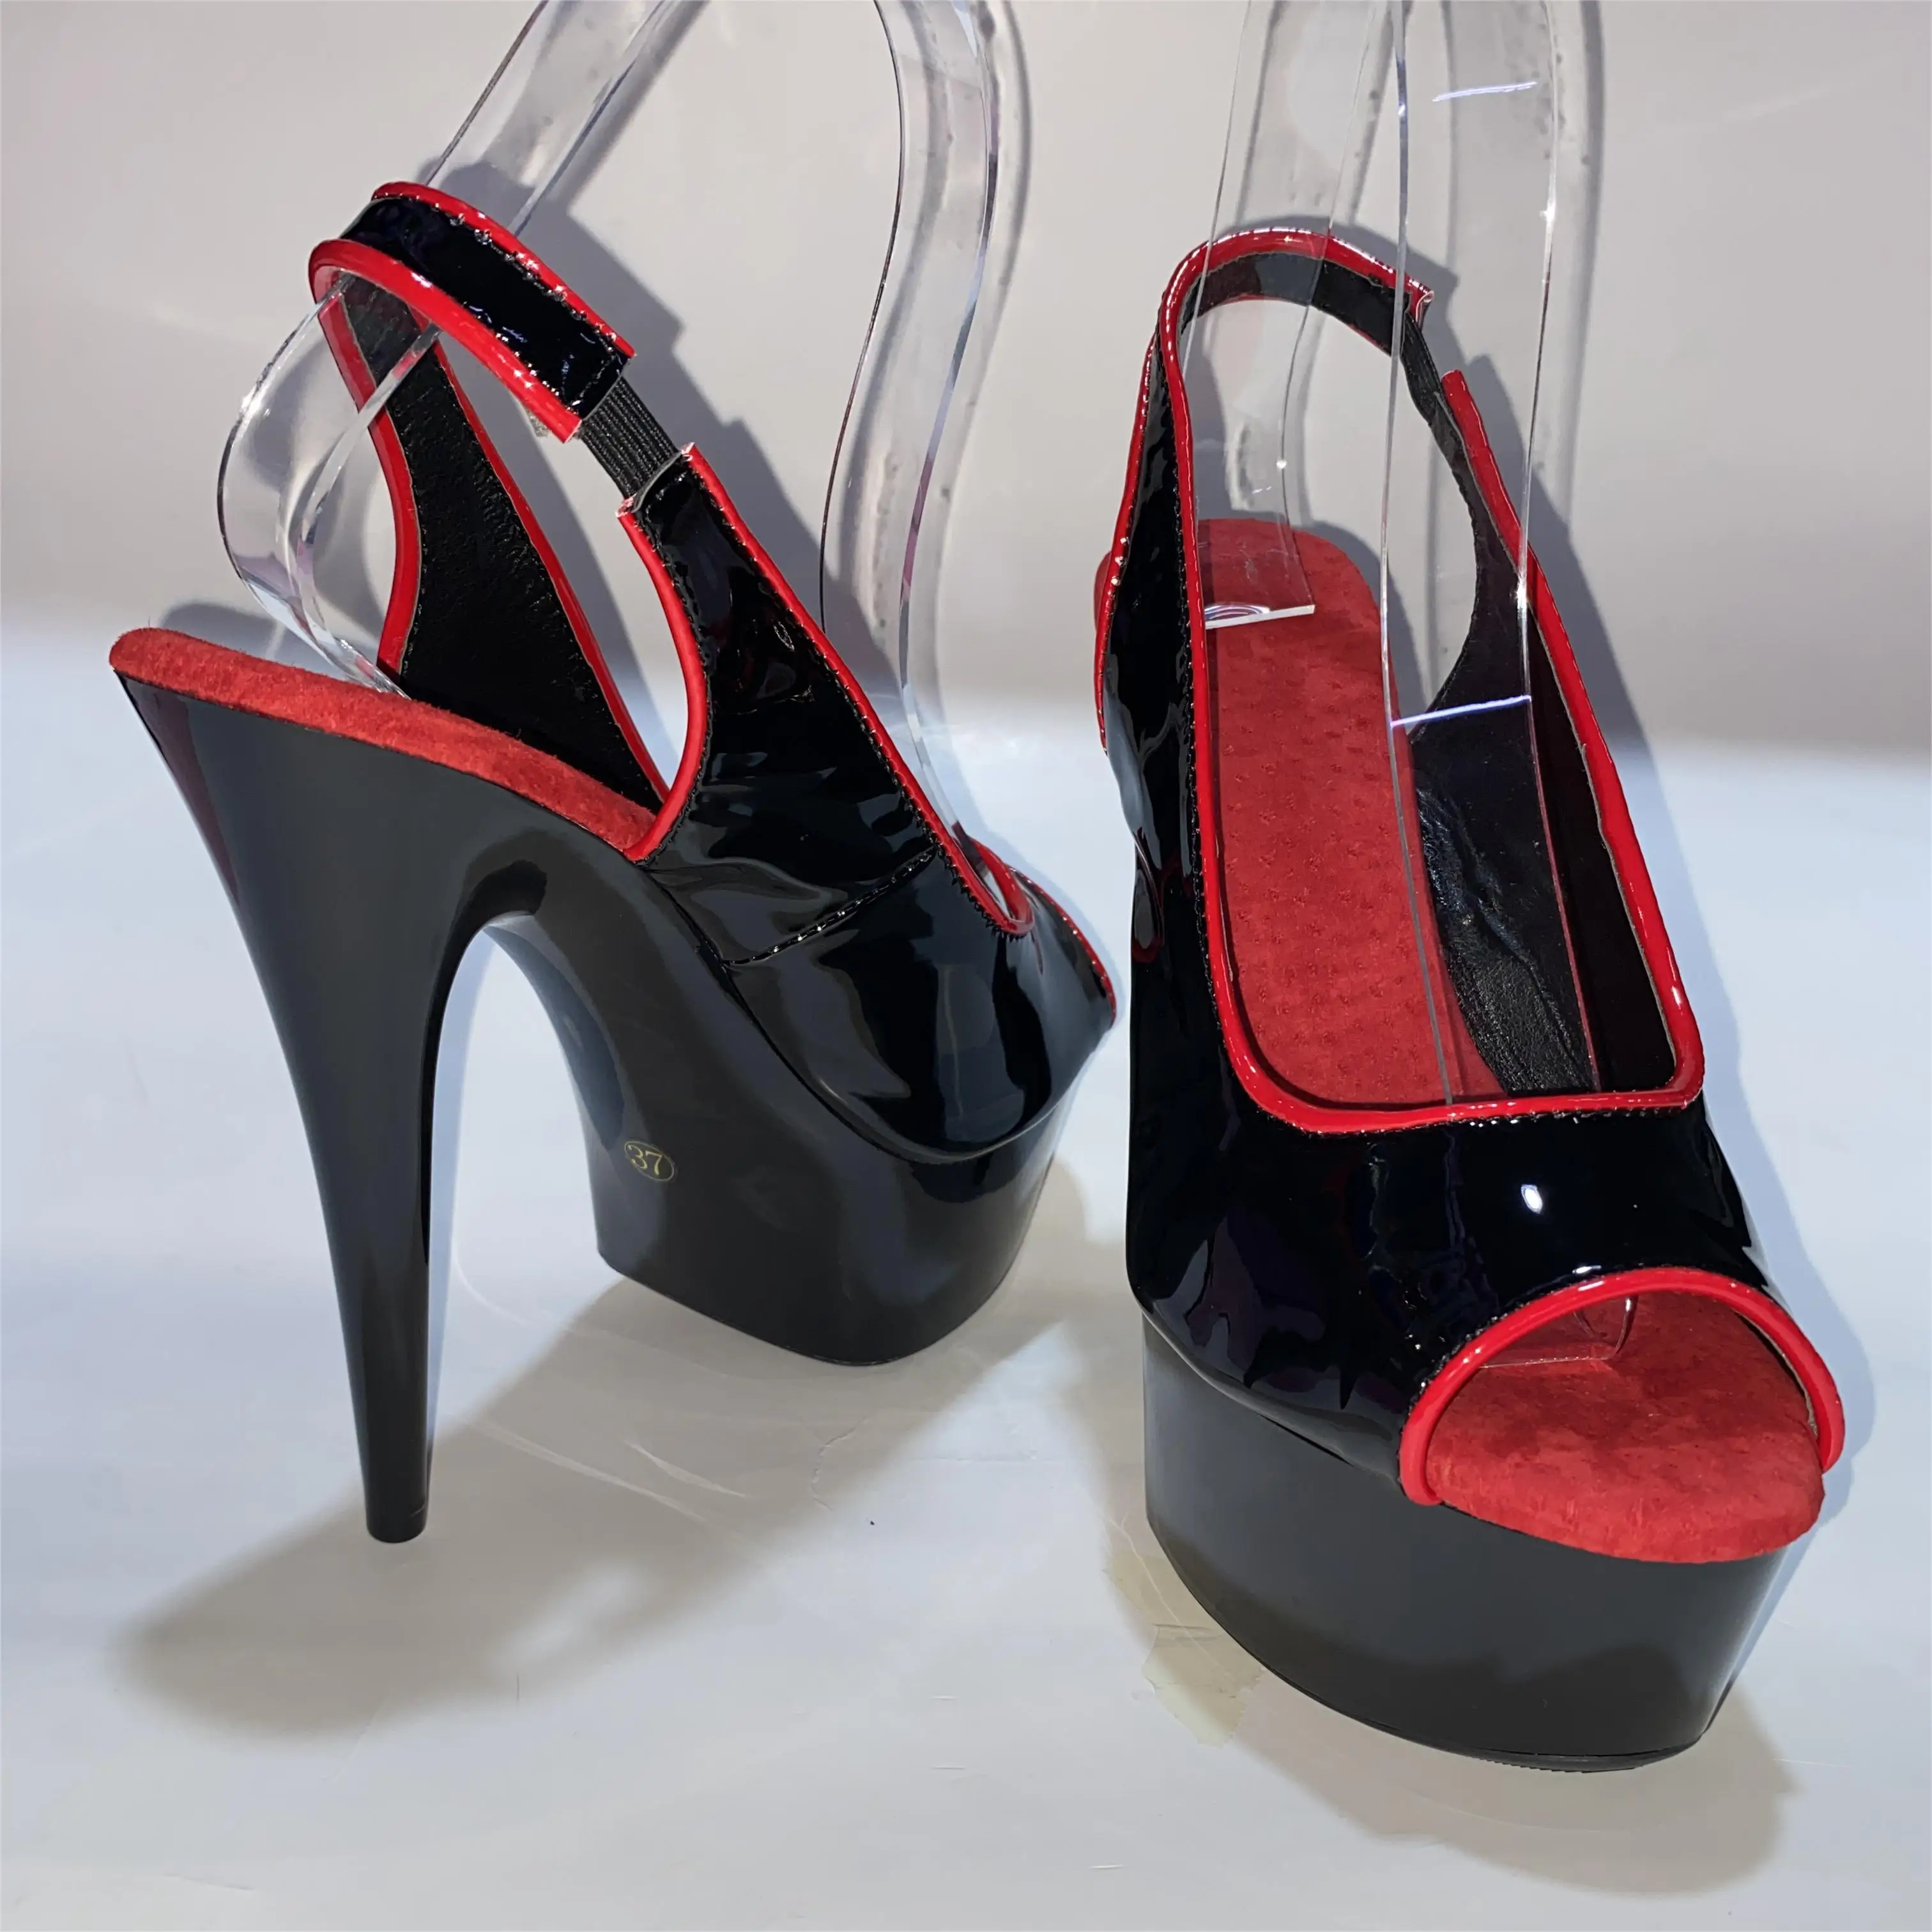 

15cm sexy heels, model party open-toe, bare-legged platform strappy 6-inch stiletto dance shoes